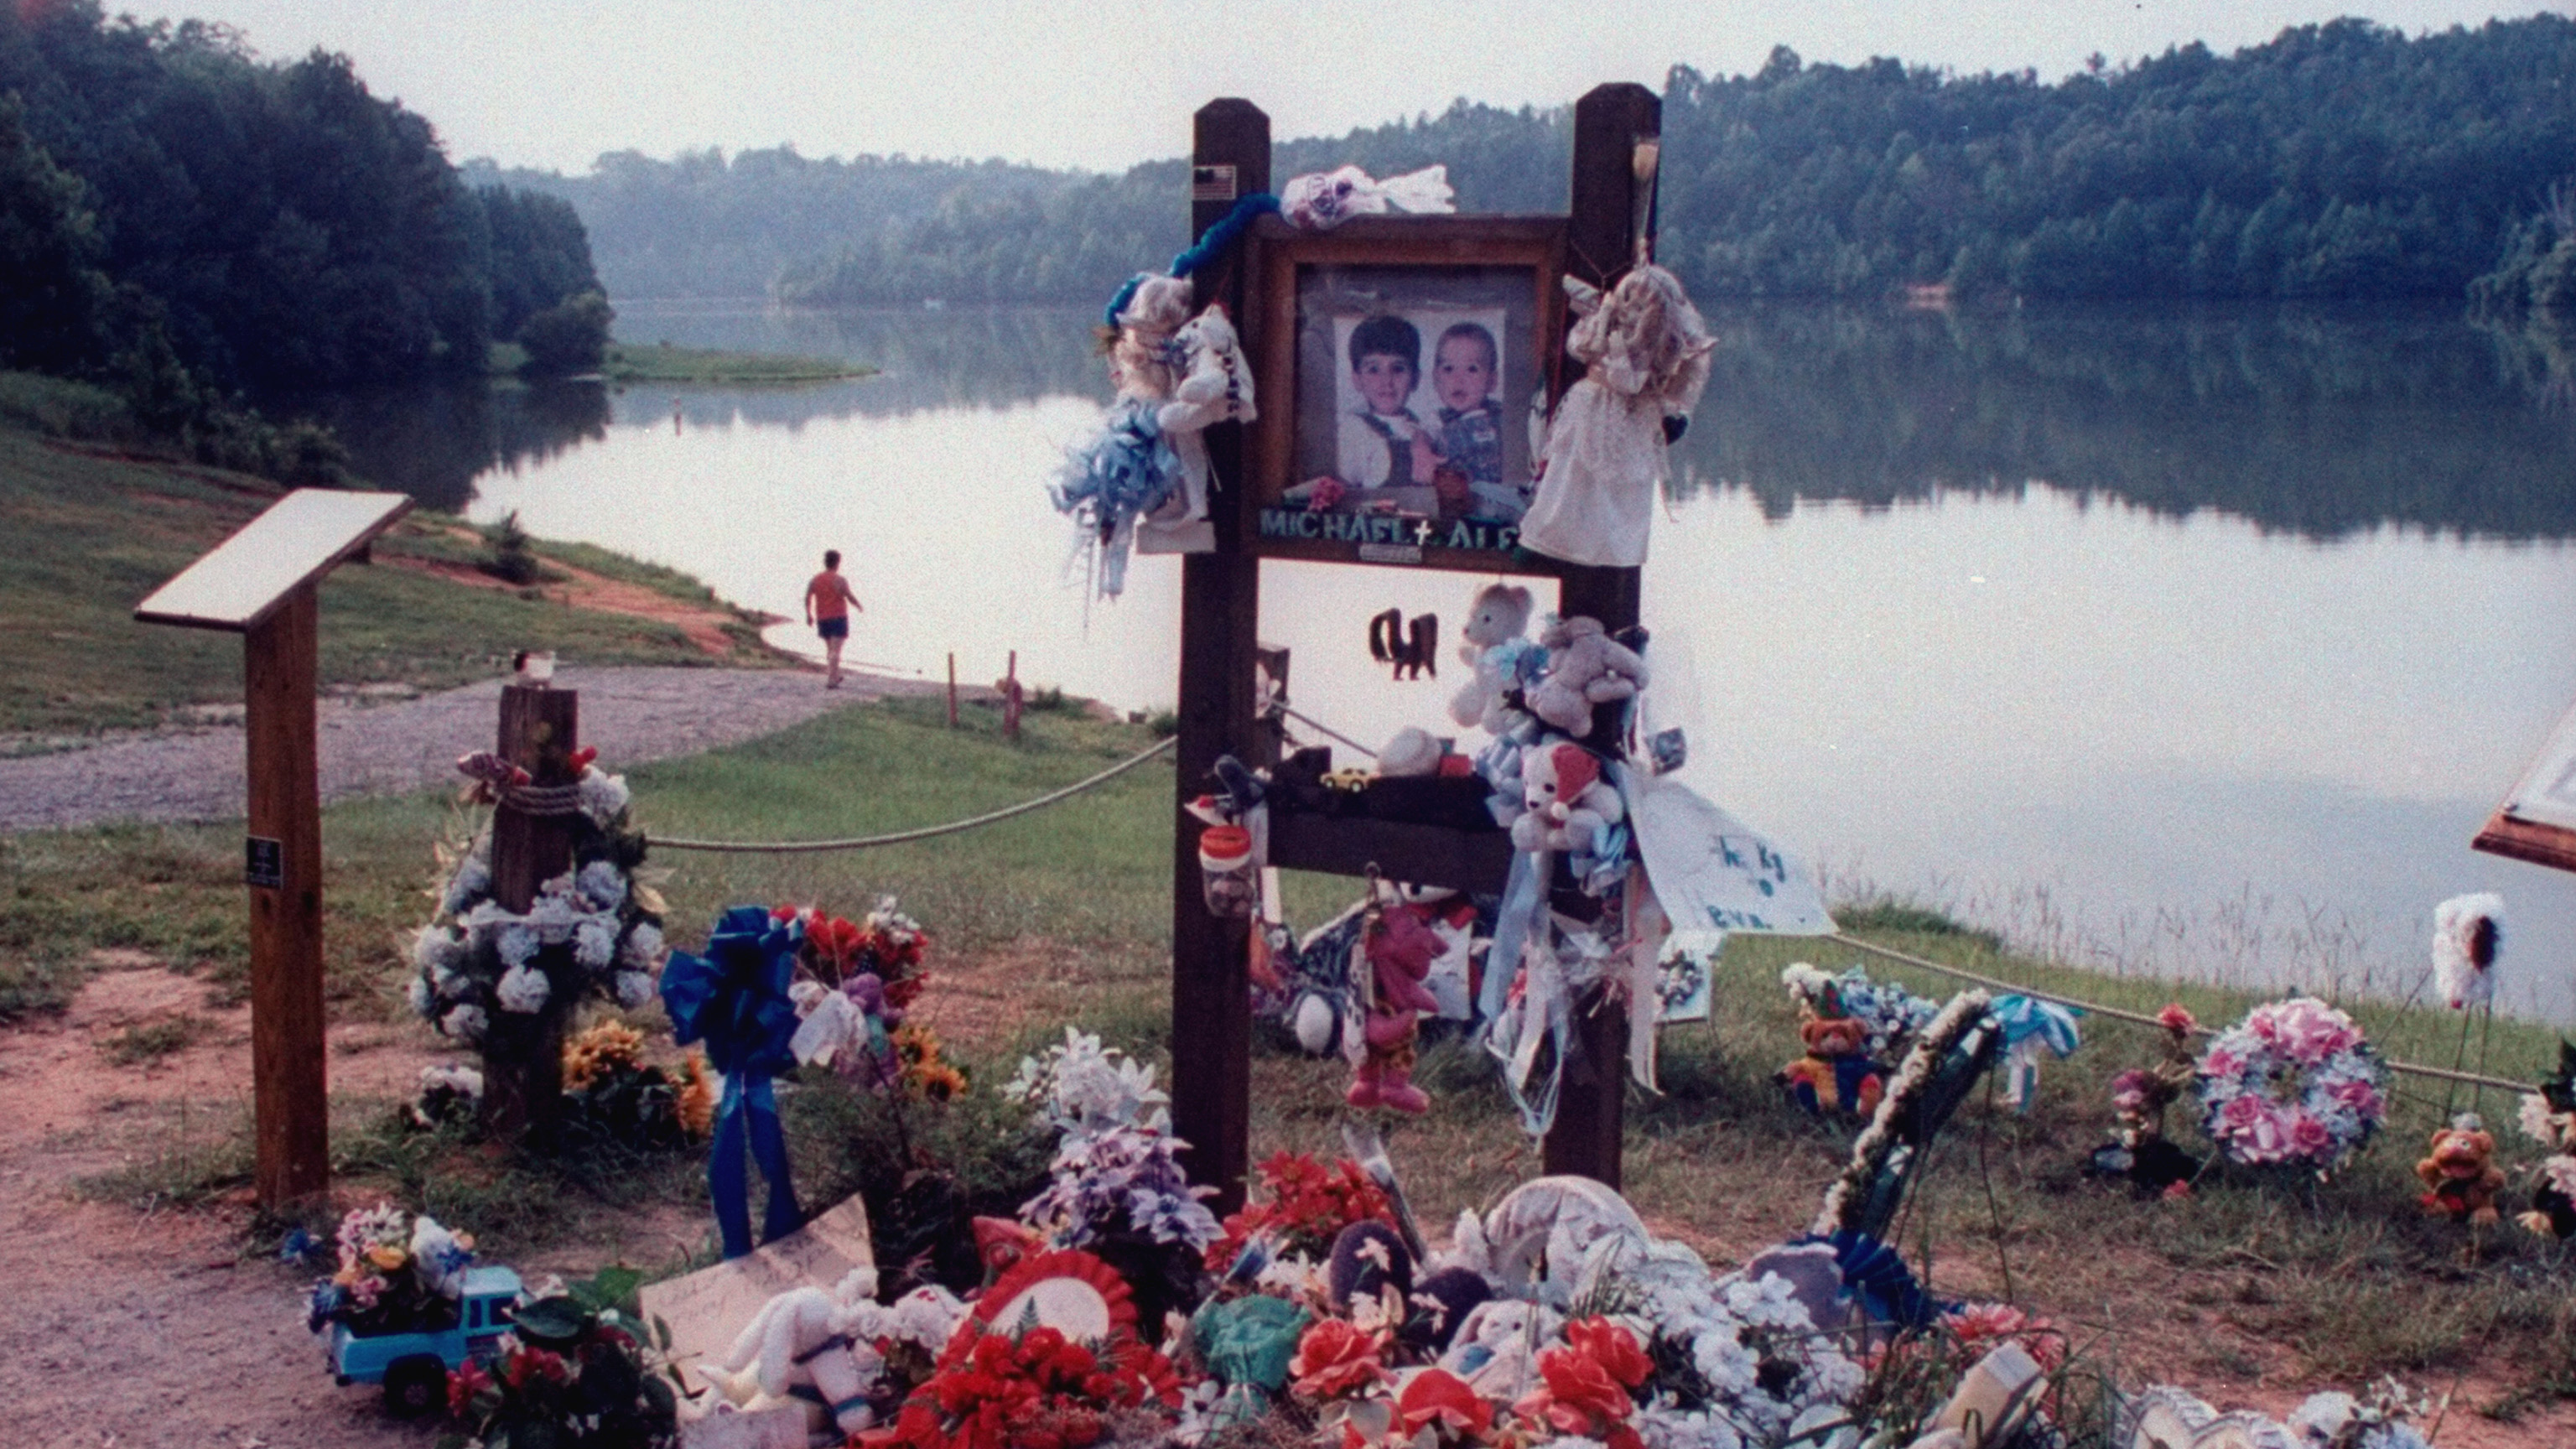 Susan Smith and 6 Other Women Who Have Murdered Their Children